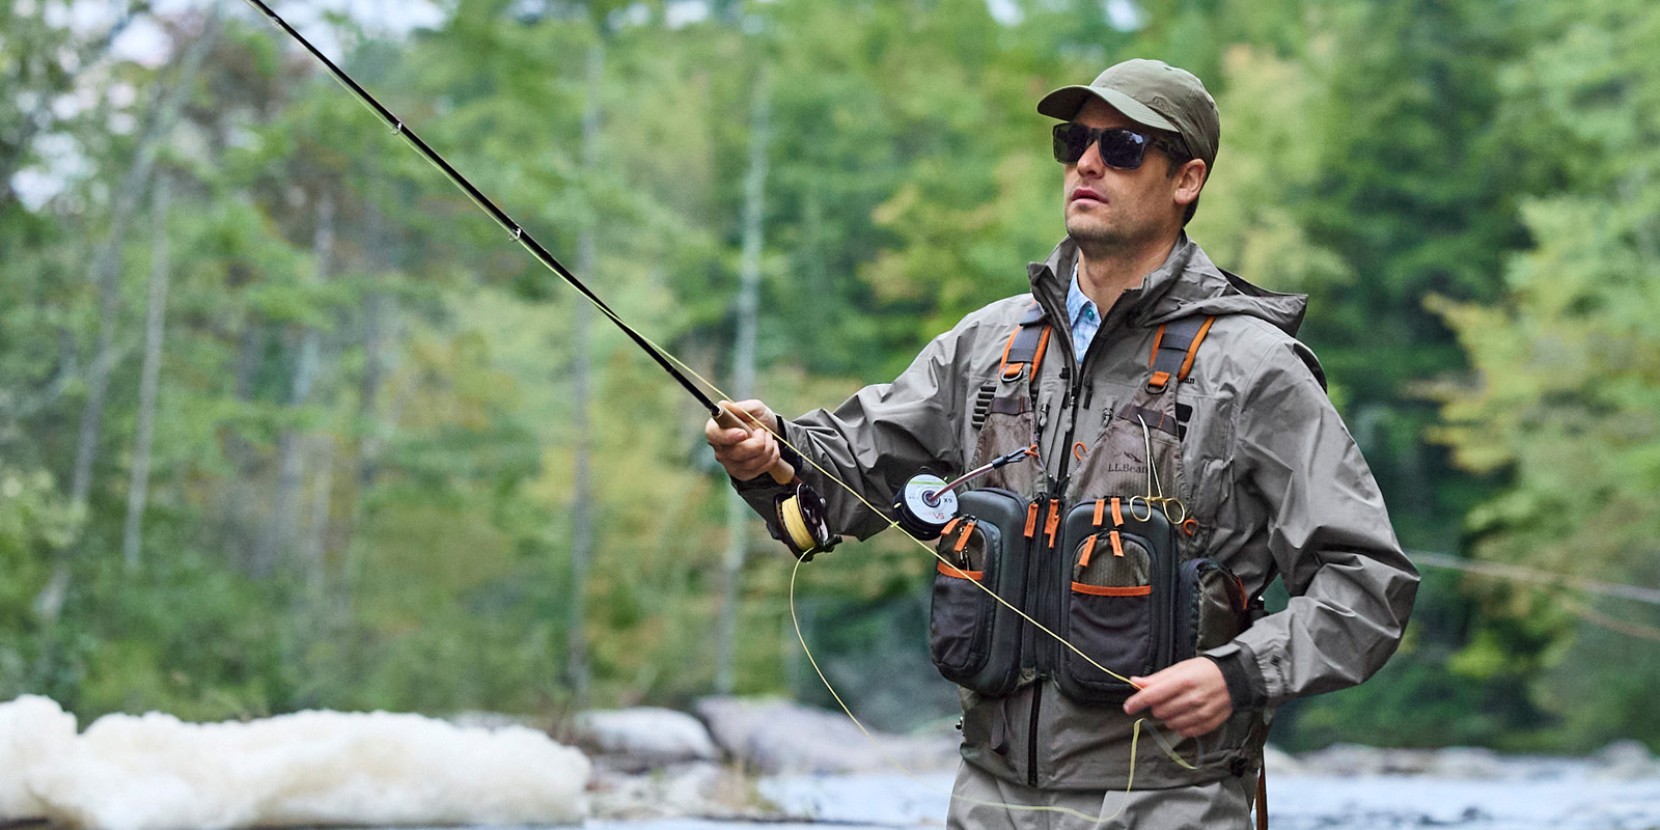  Fly Fishing Clothing And Hats